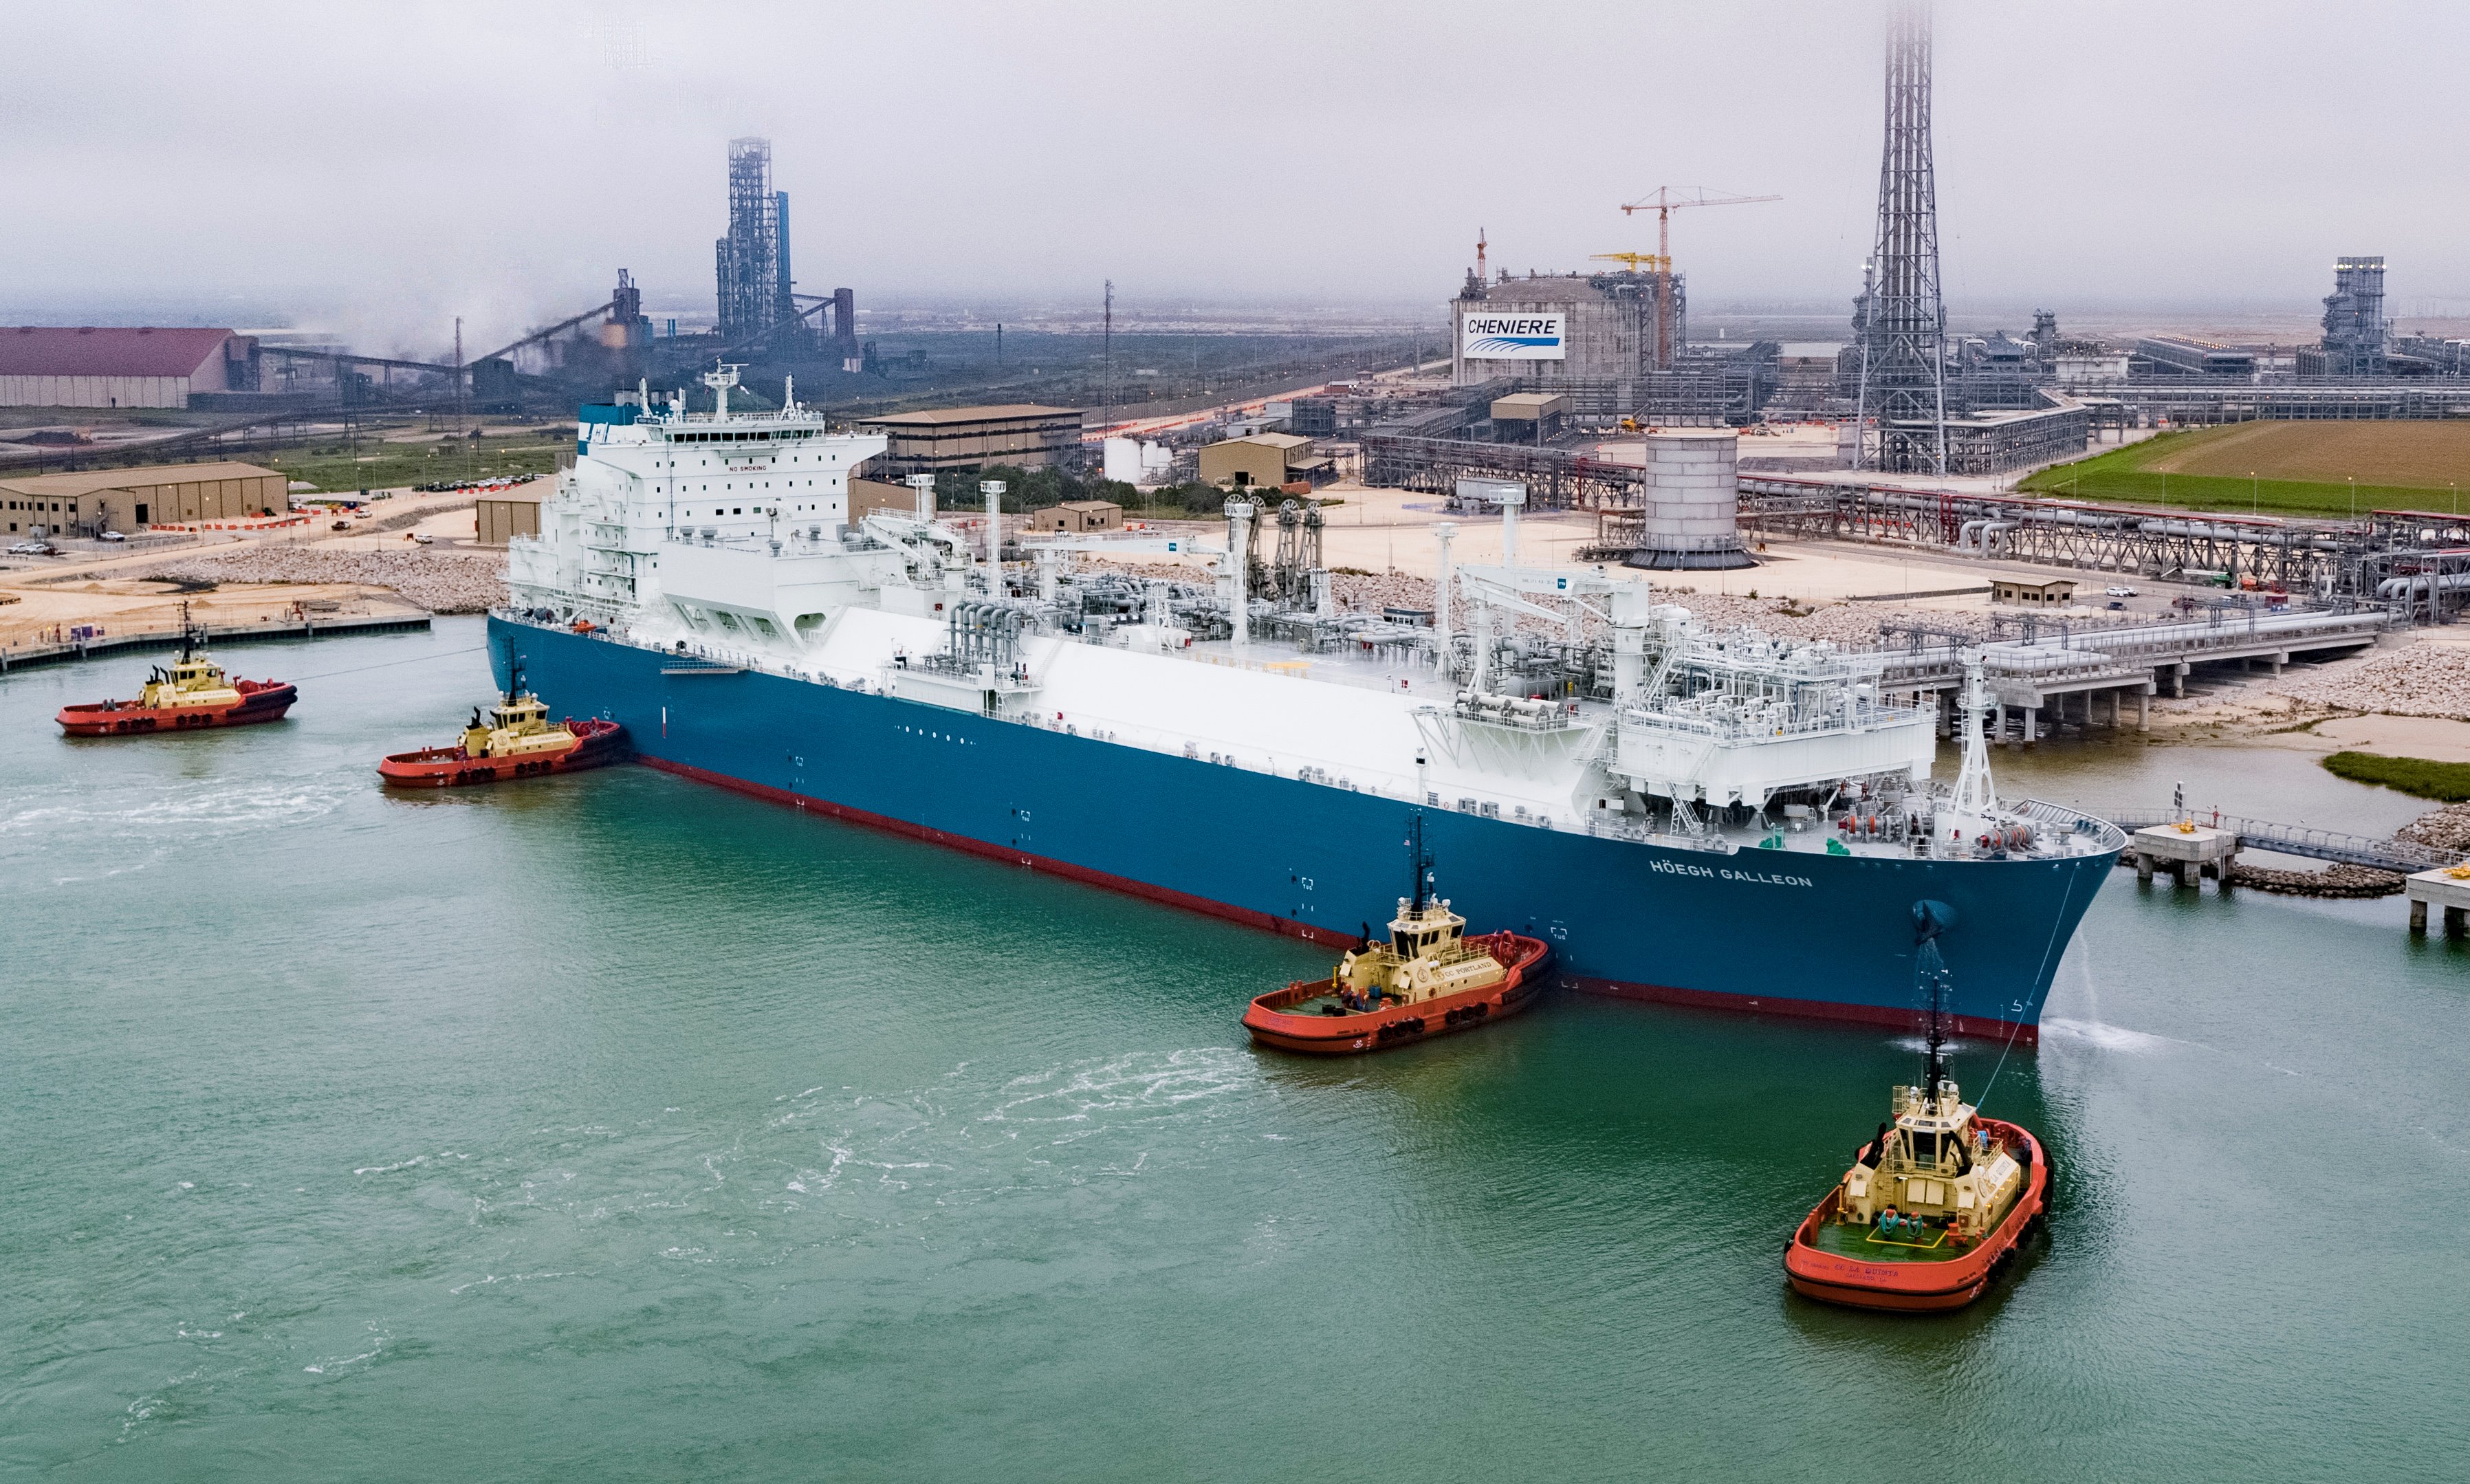 U.S. LNG exports edge up in January 2021